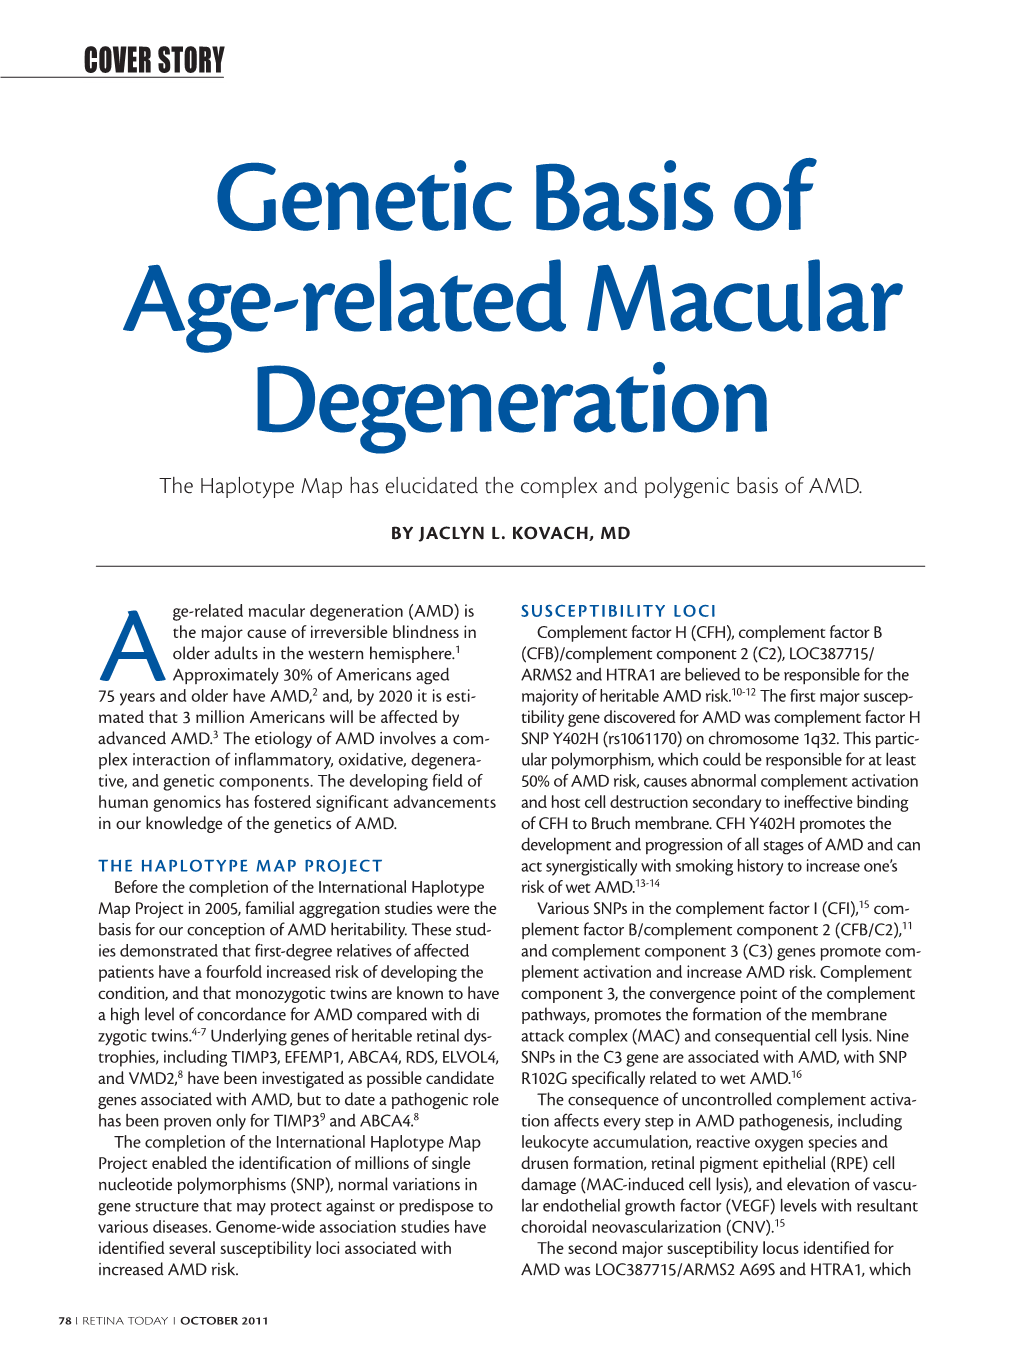 Genetic Basis of Age-Related Macular Degeneration the Haplotype Map Has Elucidated the Complex and Polygenic Basis of AMD